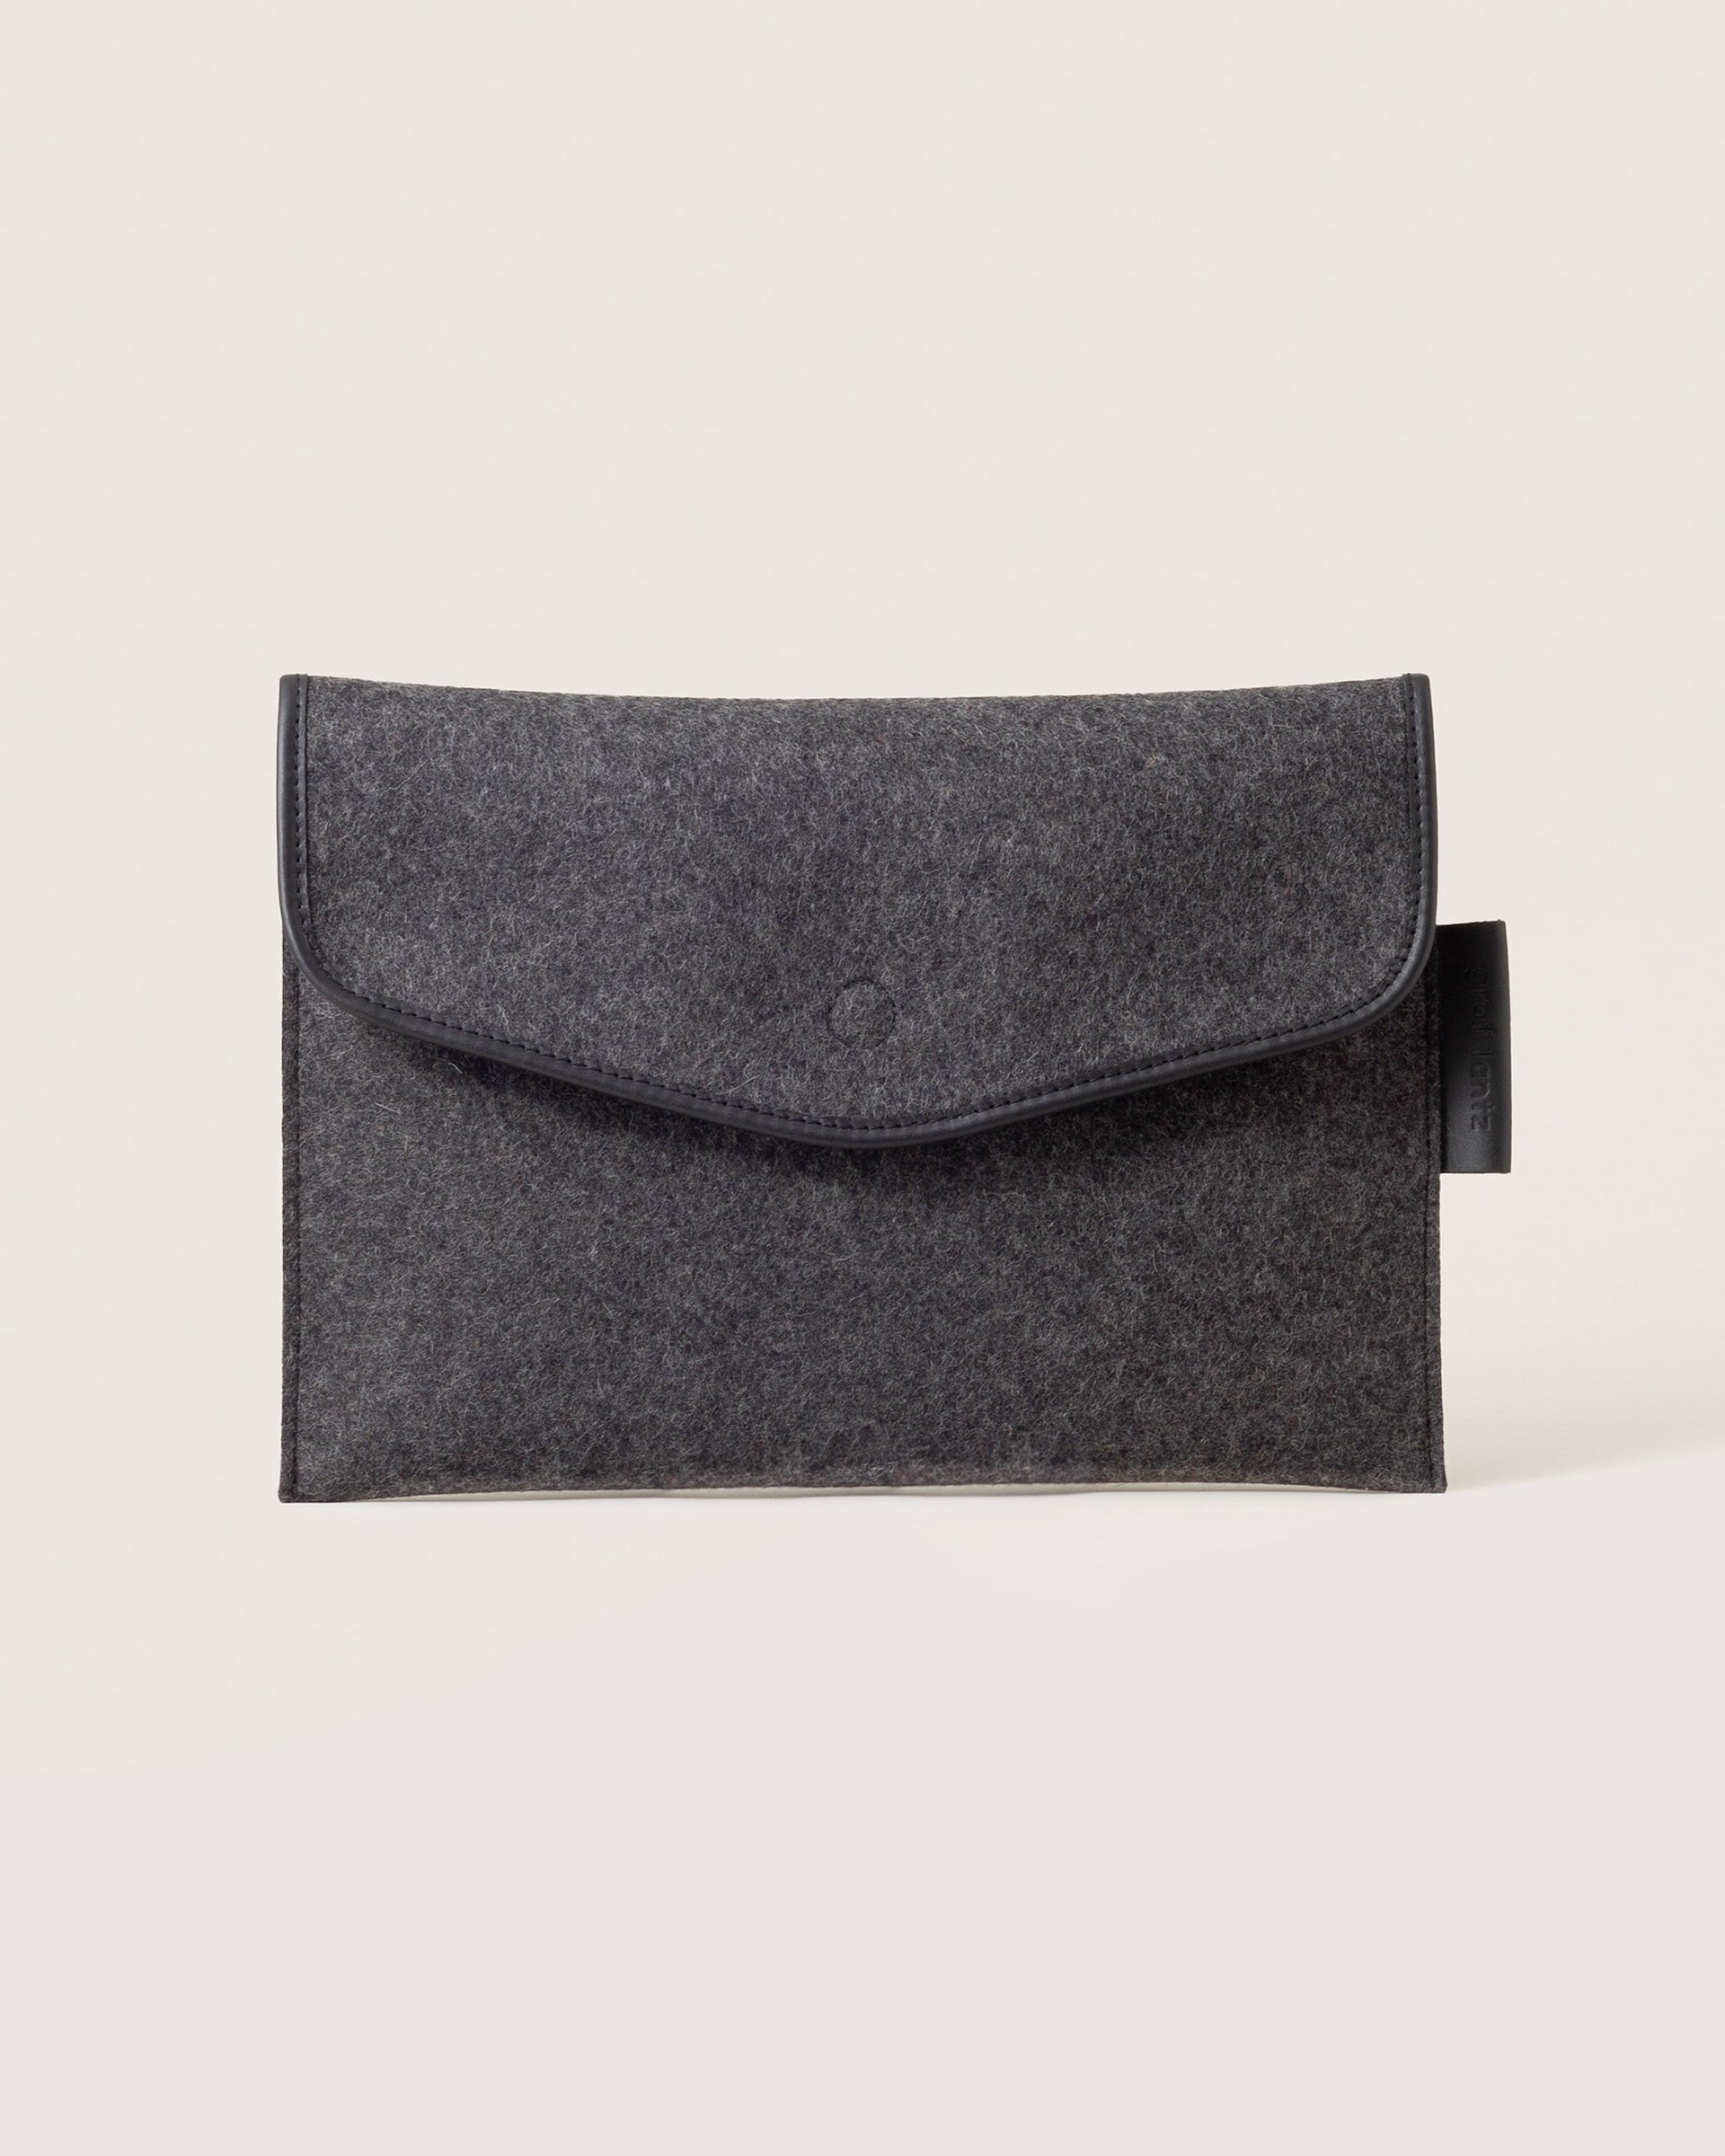 Envelope Merino Wool 14" Tech Sleeve in charcoal color with black leather application by Graf Lantz, front view